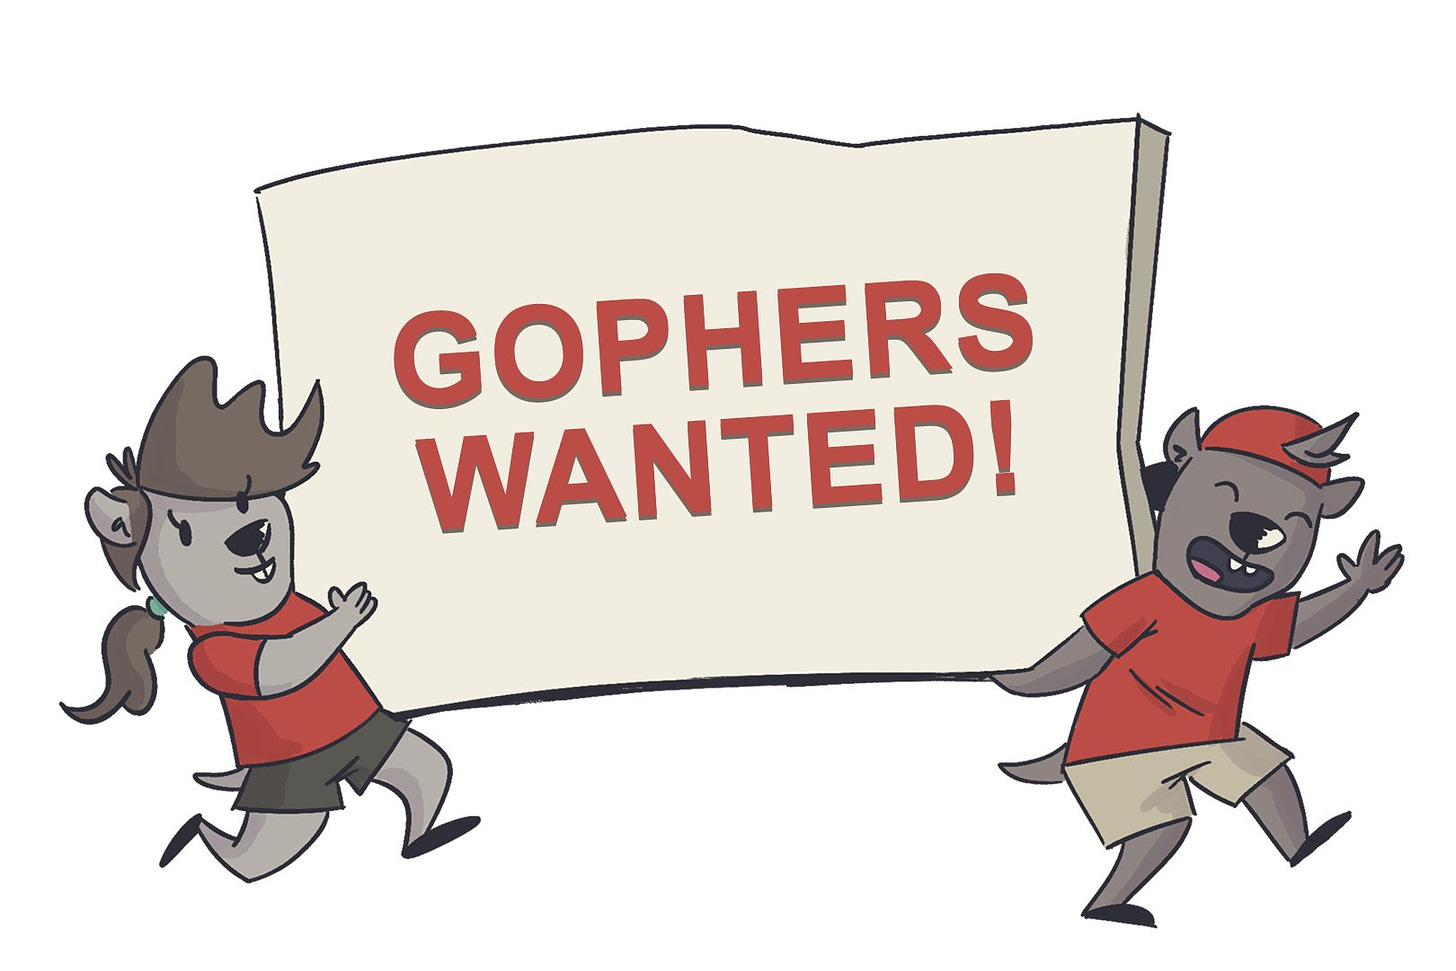 GOPHERS WANTED!

Every year dozens of volunteers, also known as Gophers, step up to make our con a success. From badge checking at doors to setup and teardown, the Gopher team supports our staff through every step of the convention to ensure that your con experience is as enjoyable as possible. As a Gopher, you'll embody the spirit of service and volunteerism that permeates the furry fandom. Of course, there's plenty in it for you, too—you'll earn rewards based on the number of hours you work, including previous years' con merch!

Being a Gopher is a great way to dip your toes into running a convention for those who are considering staffing in the future. There's no set requirement on how many hours you volunteer—join in when you want, and step out if you need to. Every bit of help is much appreciated!

Find out more info here: http://www.anthrohio.org/contribute/gopher